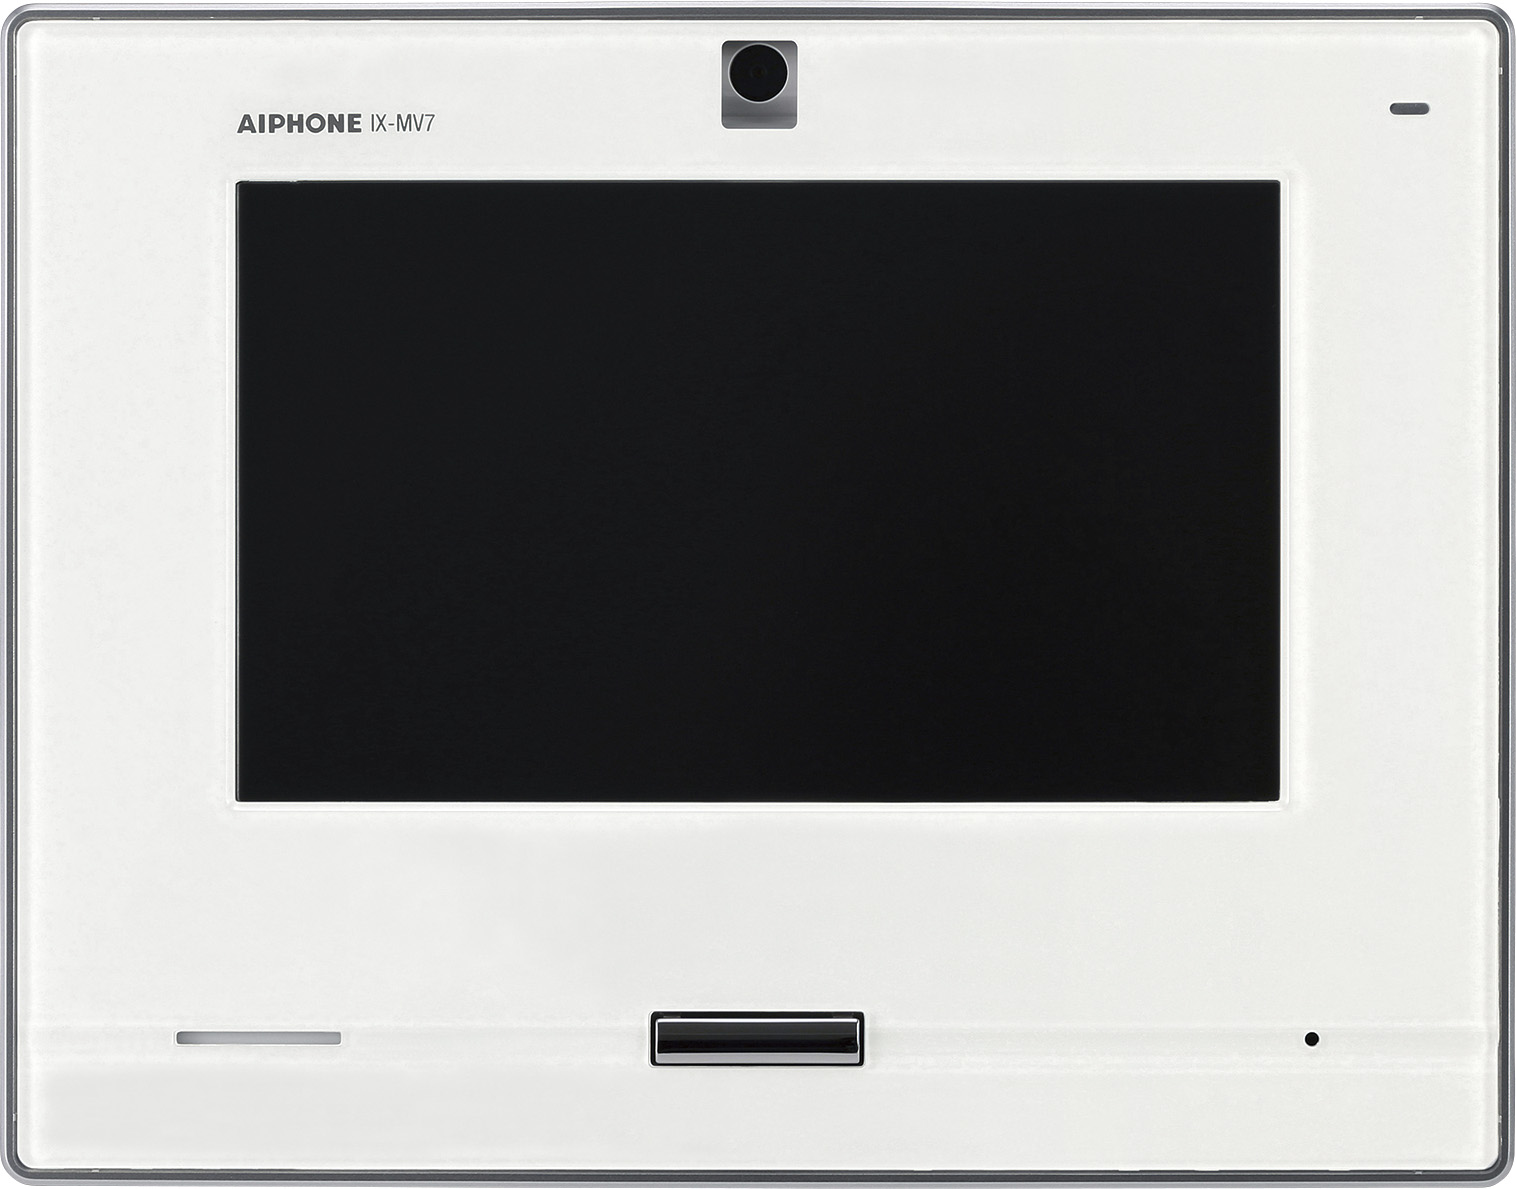 AIPHONE IX SERIES 2 IP INTERCOM MONITOR WHITE COMMERCIAL 7 INCH DISPLAY TOUCHSCREEN PLASTIC 48V POE SWITCH